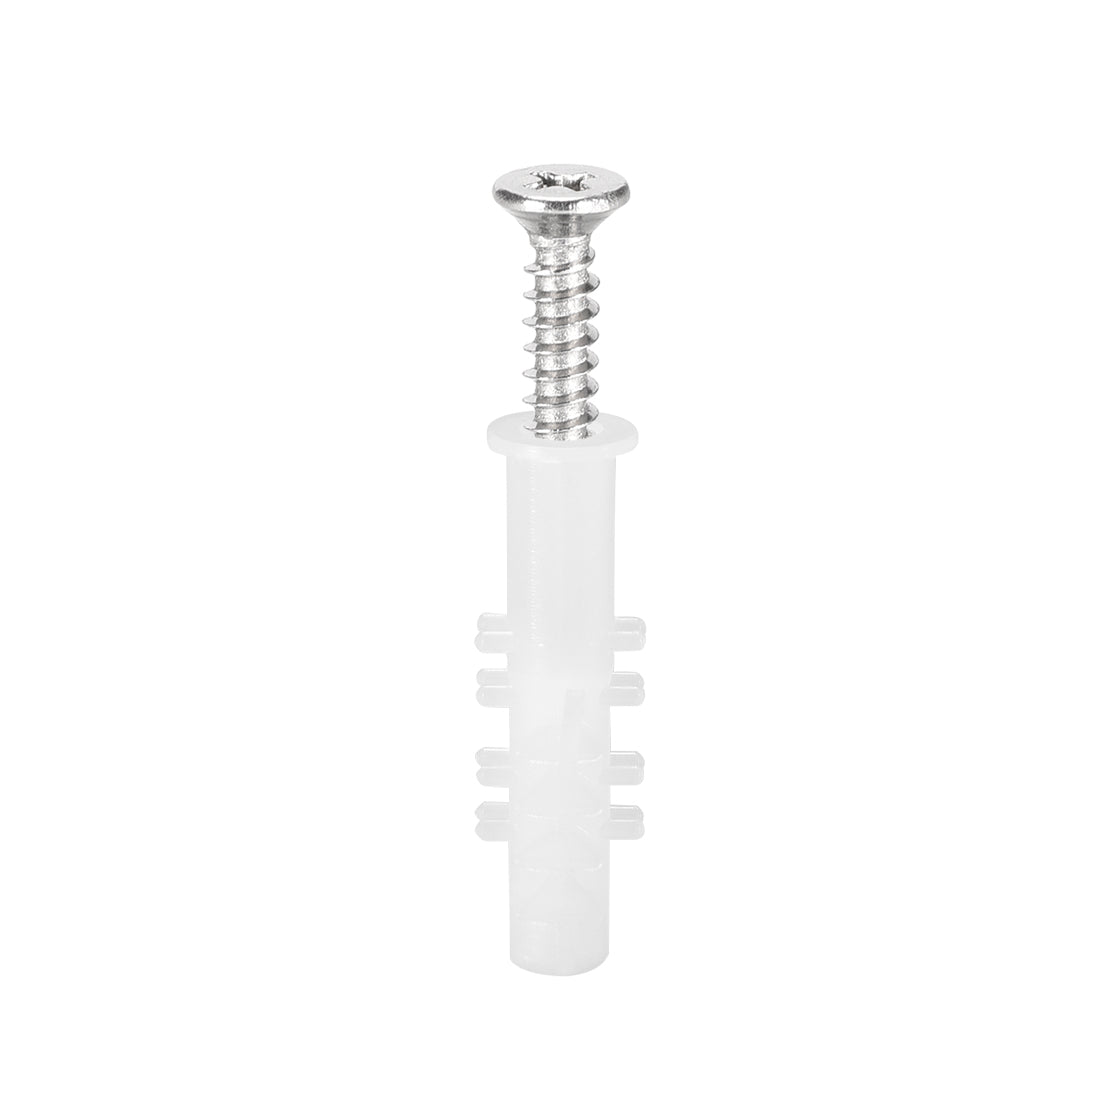 uxcell Uxcell 6x30mm Plastic Expansion Tube for Drywall with Screws White 50pcs